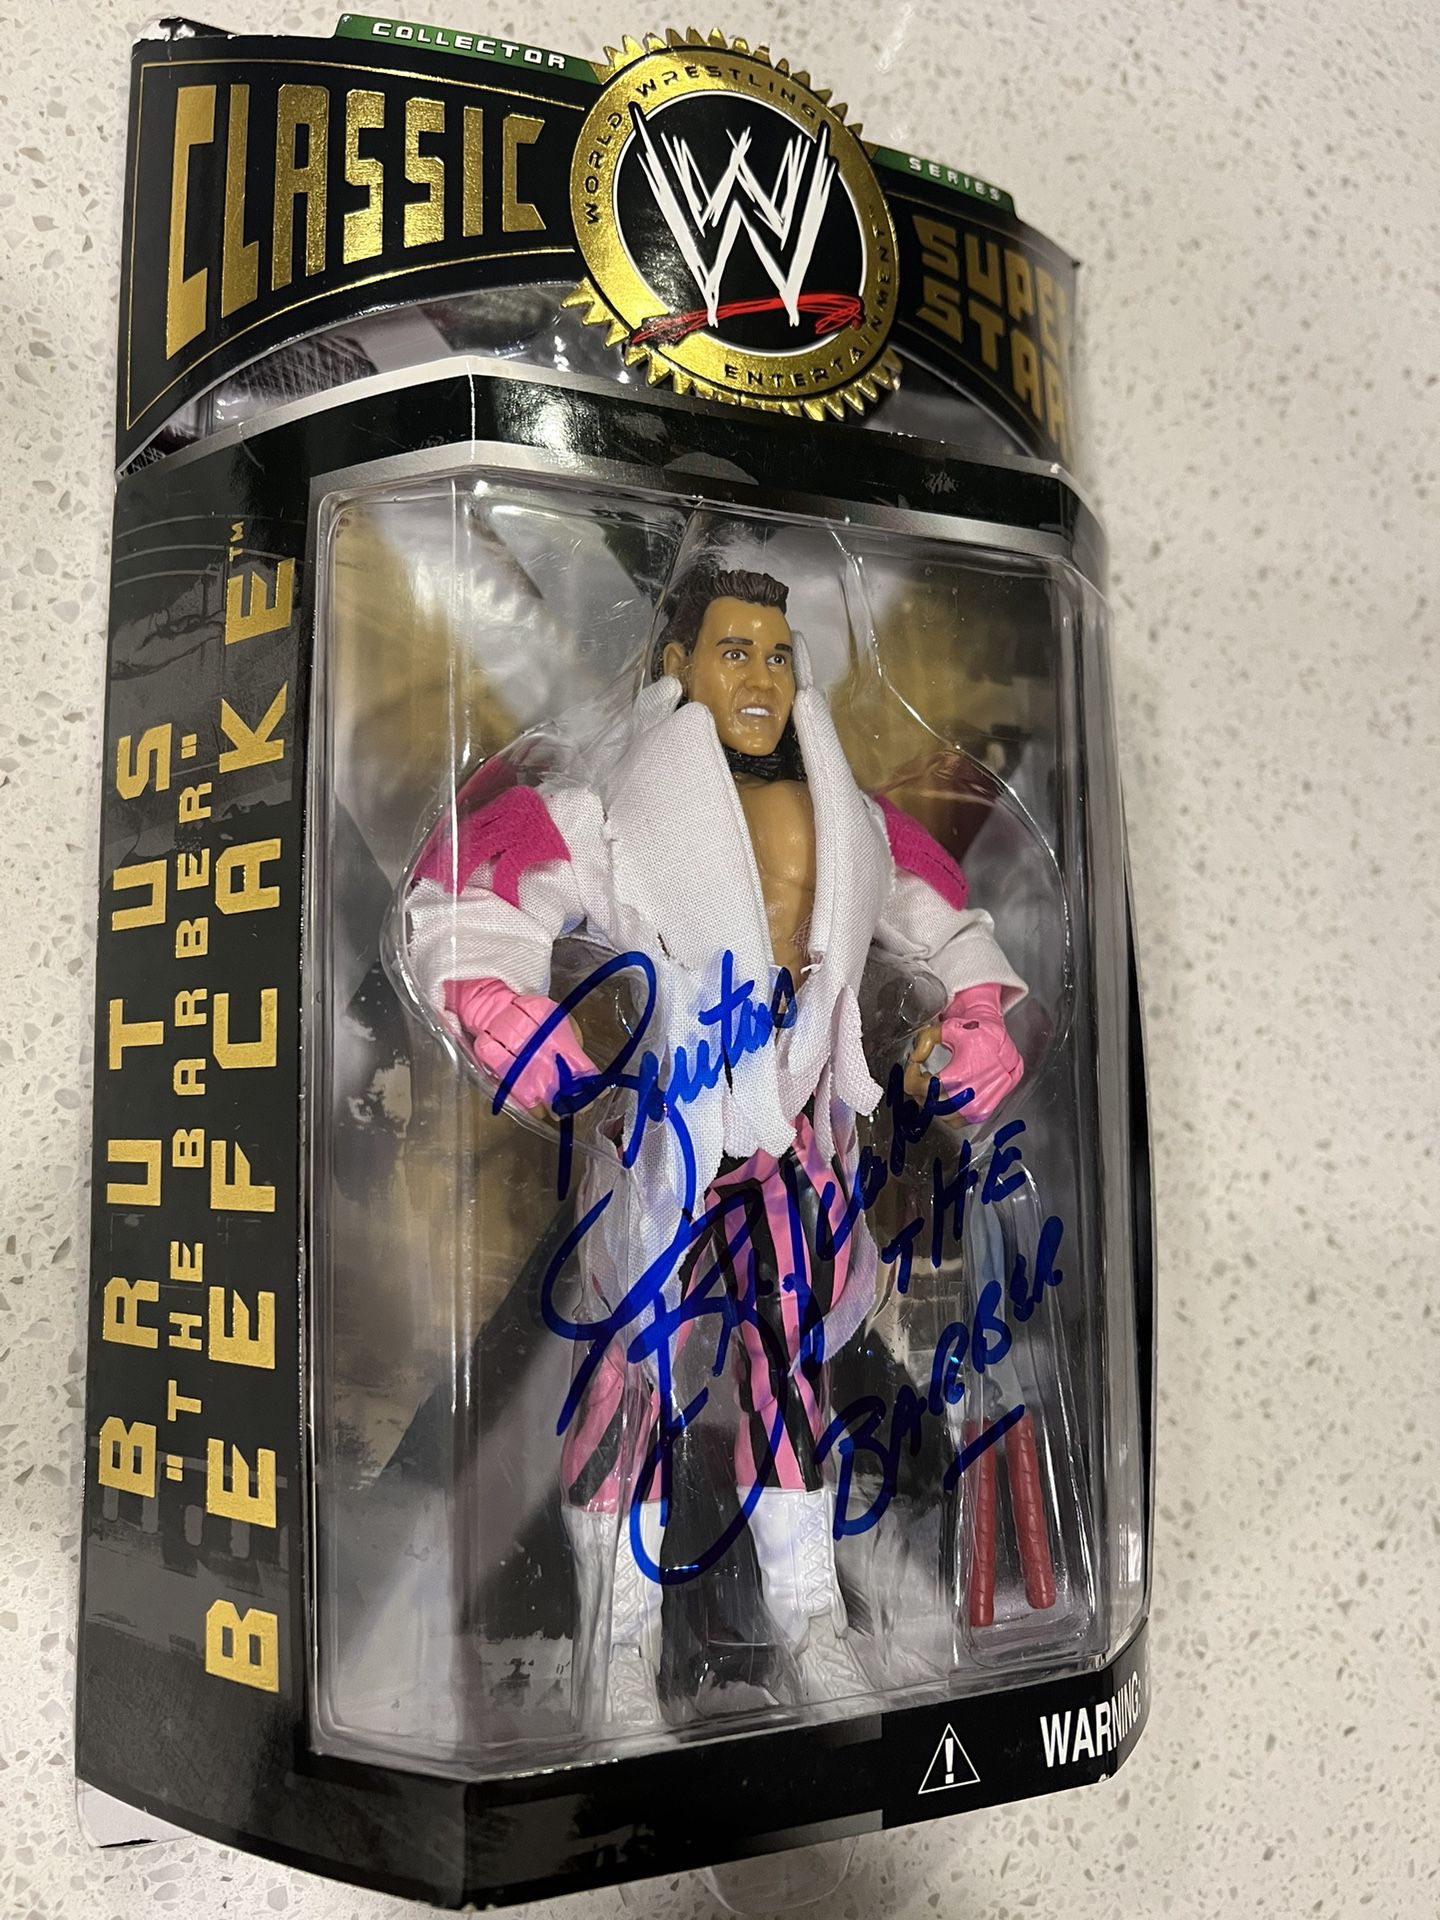 Autographed Classic super Stars Action figure “Brutus the barber beefcake ”